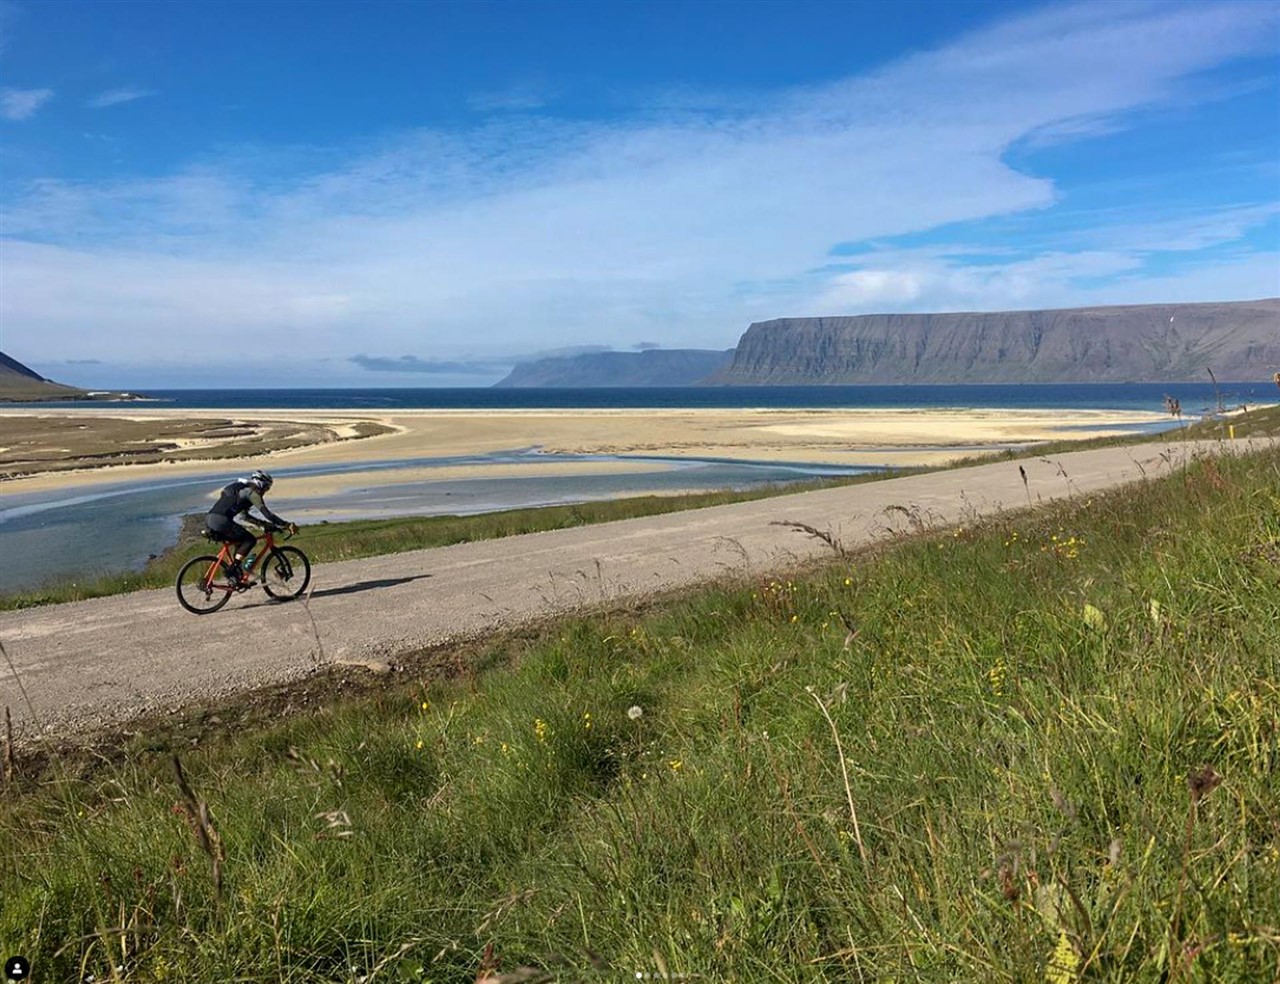 https://icebikeadventures.com/wp-content/uploads/2023/02/Gravel-cycling-in-the-westfjords-of-Iceland.jpg